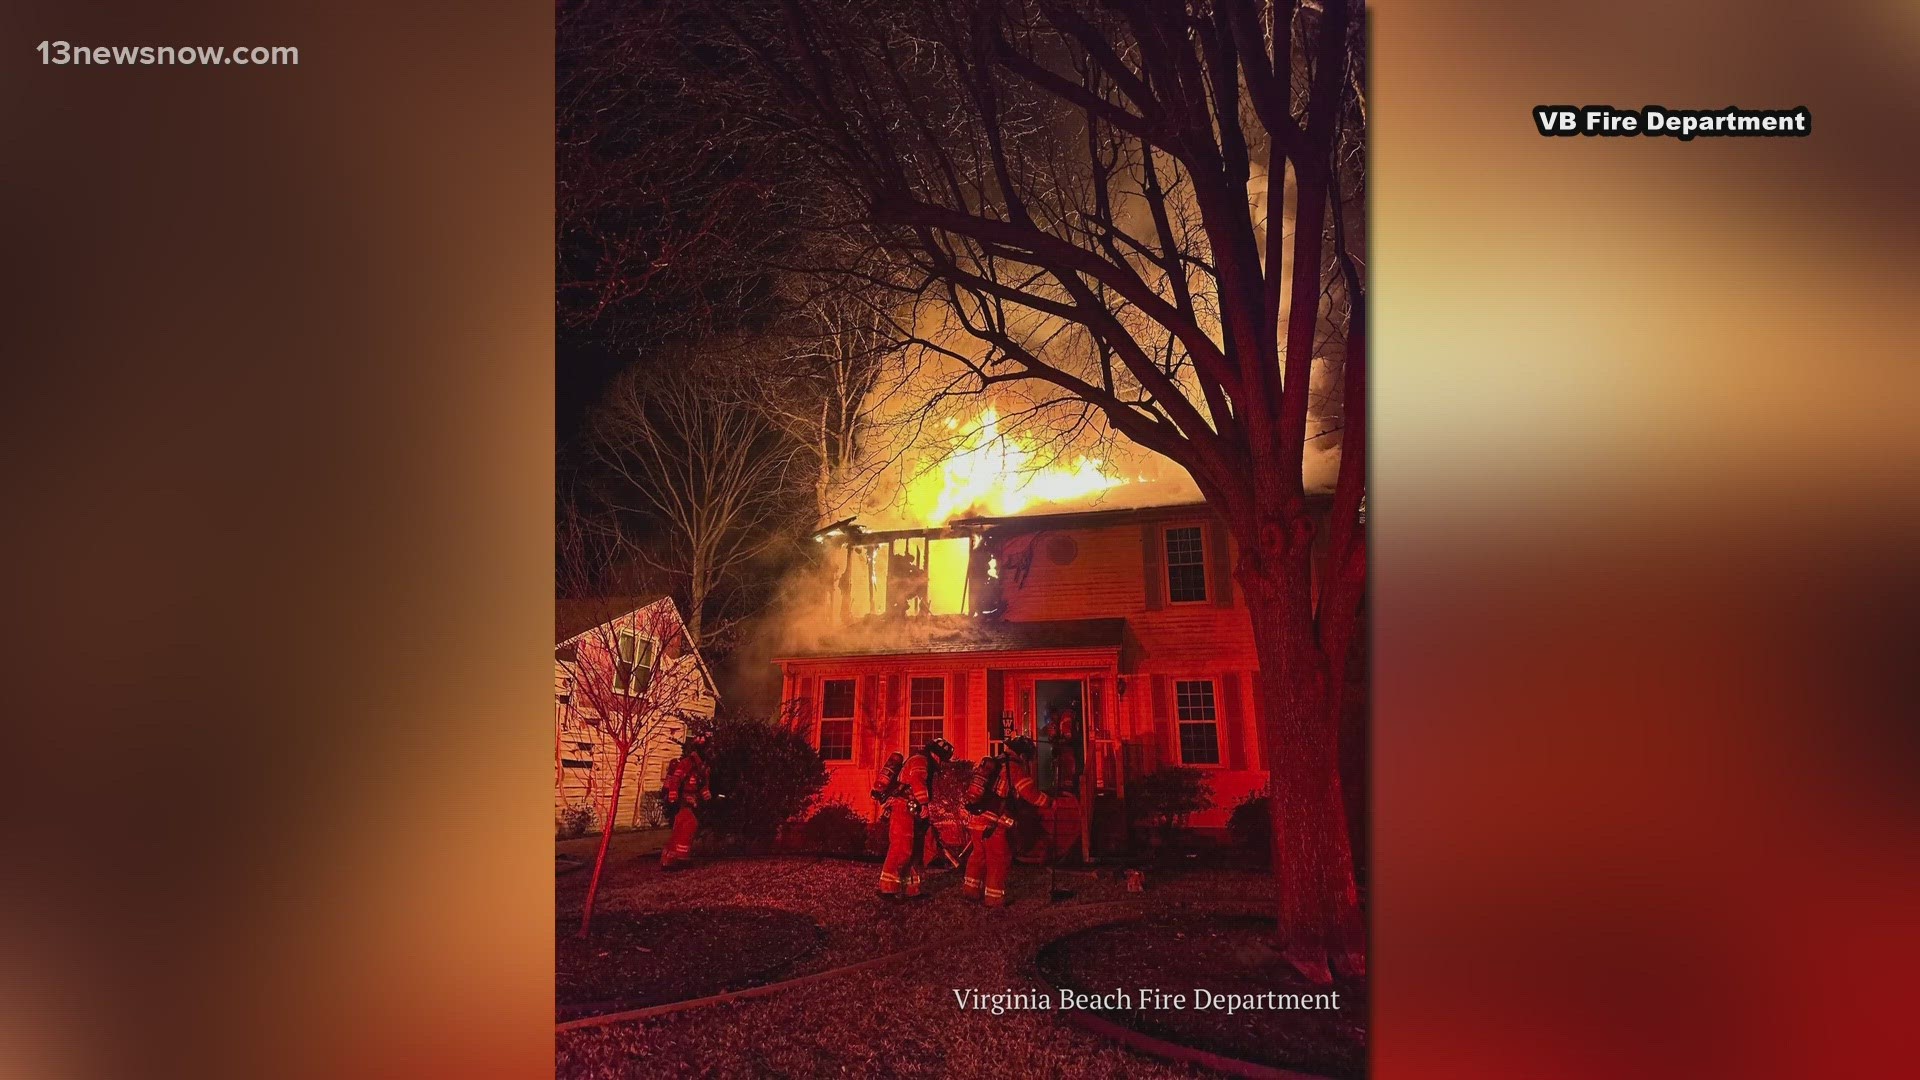 Virginia Beach Fire Department says they responded to a house fire in the 1000 block of Wessex Lane in the Lake James section of the city around 11:53 p.m.